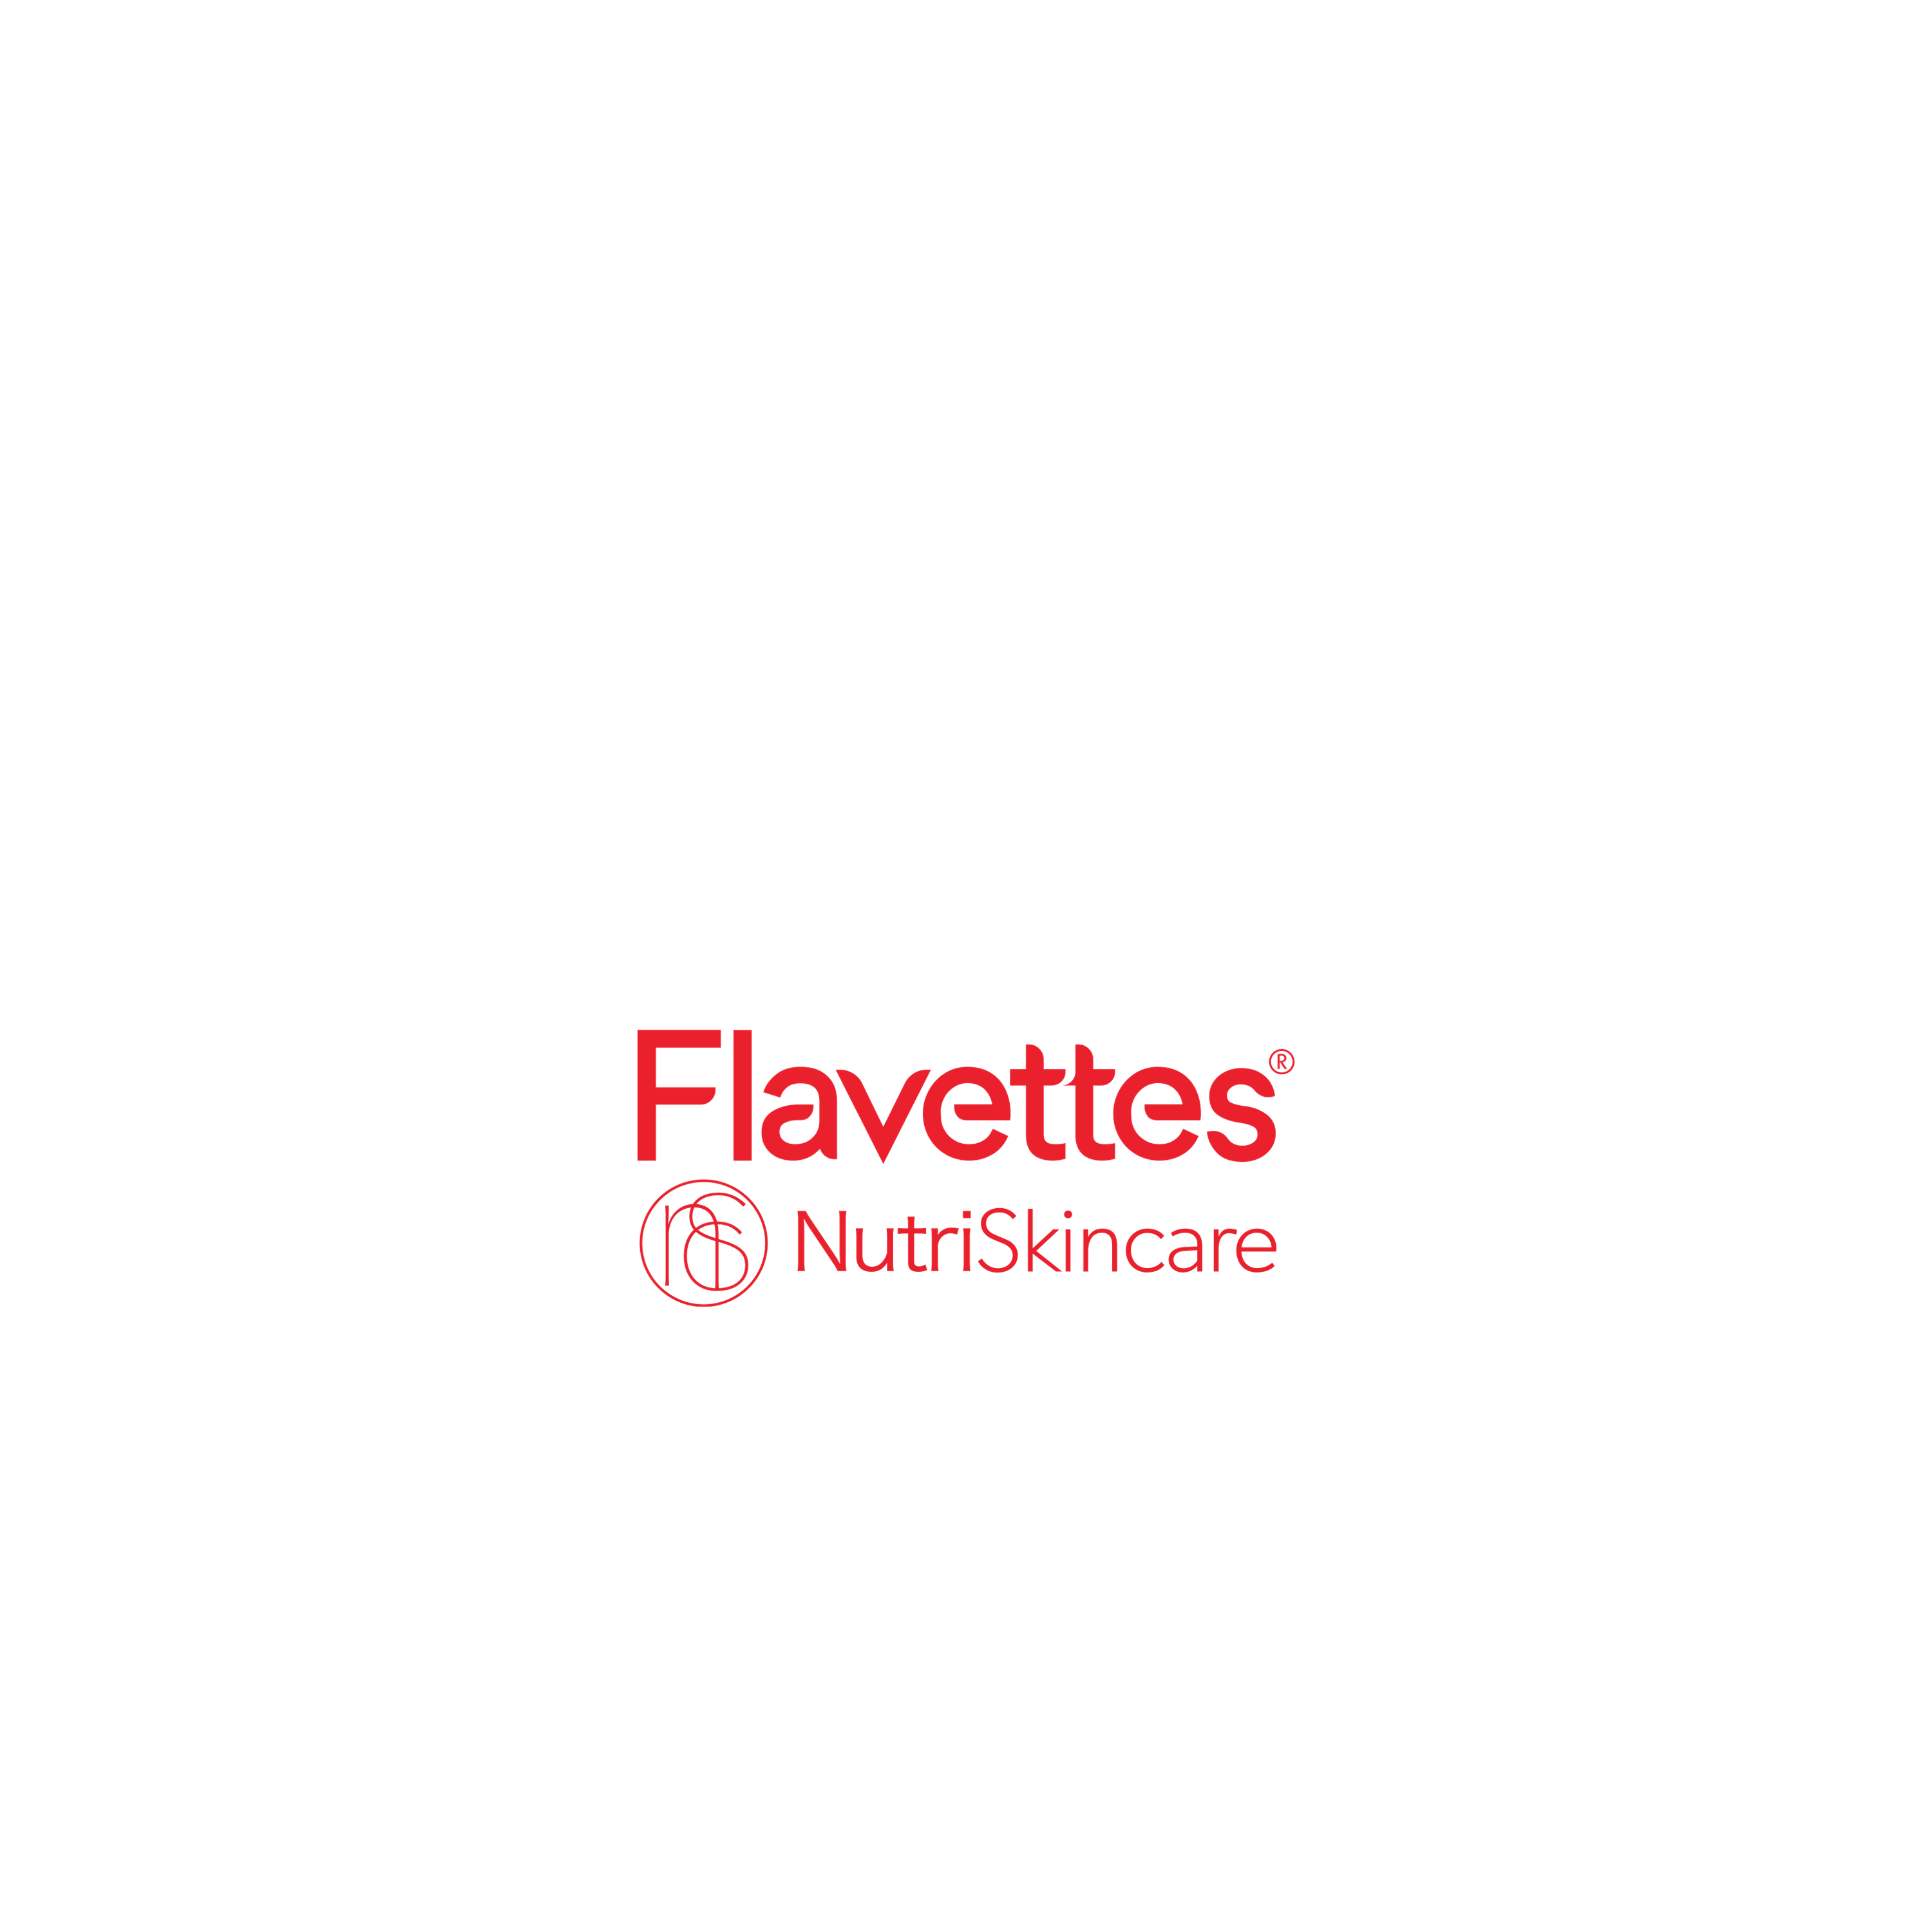 CHRISTY NG FOR FLAVETTES